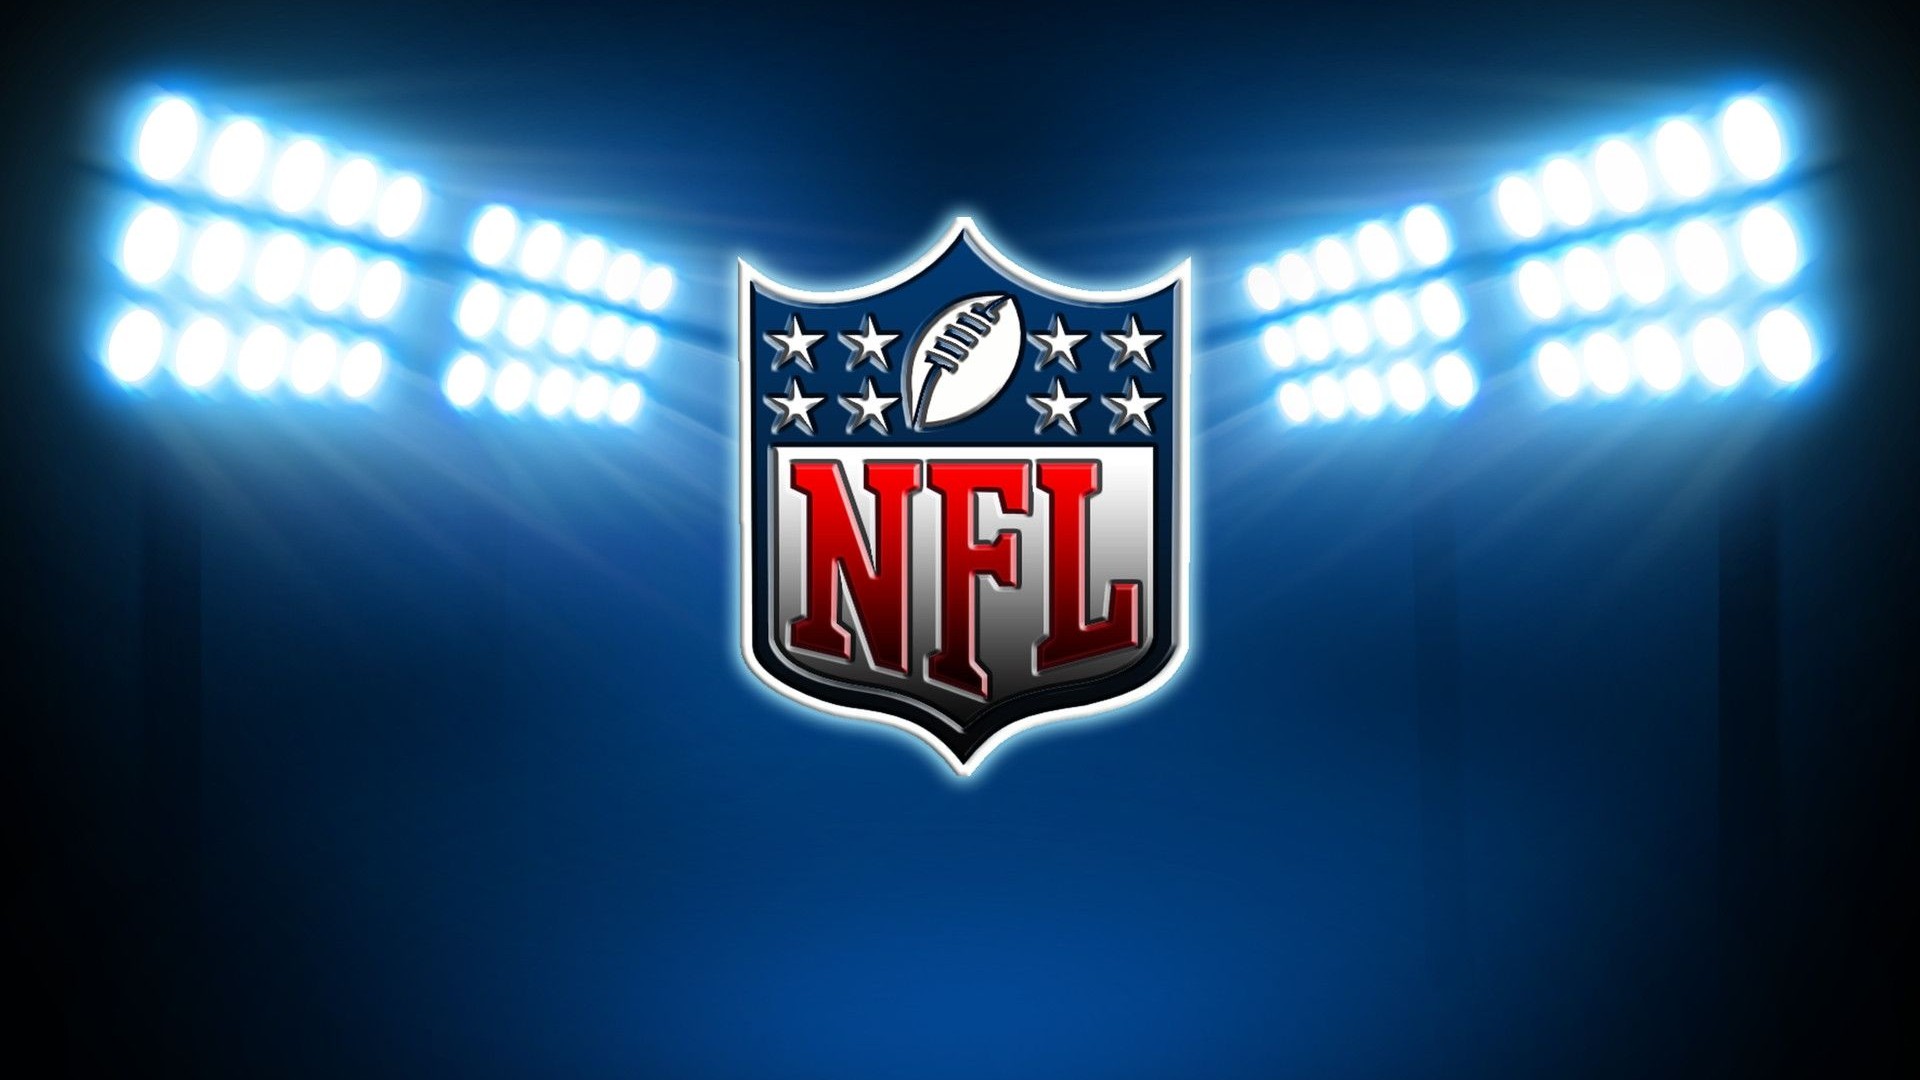 Backgrounds NFL HD 1920x1080